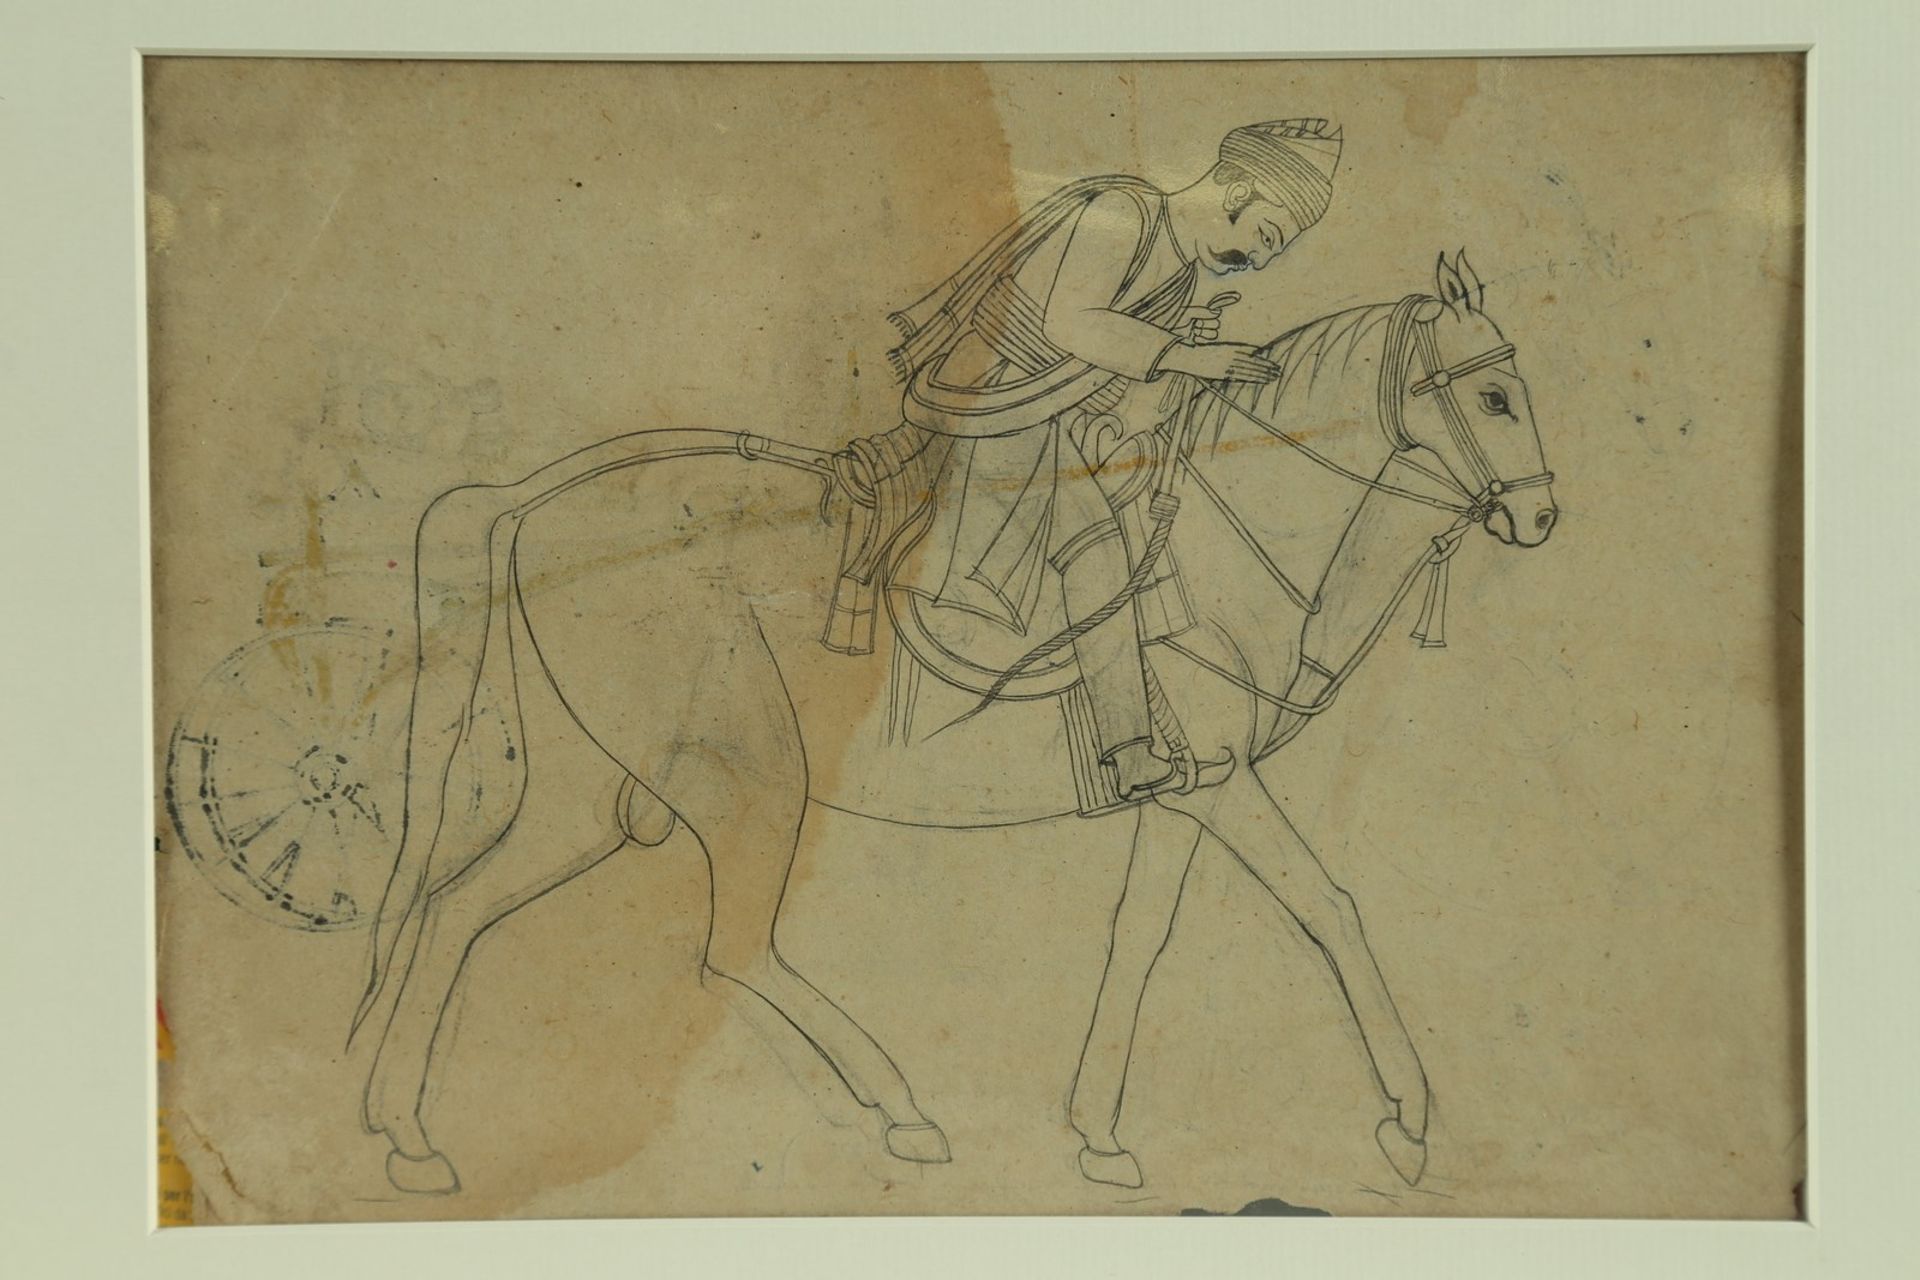 Arte Indiana A front and back horse rider sketchIndia, 19th century.